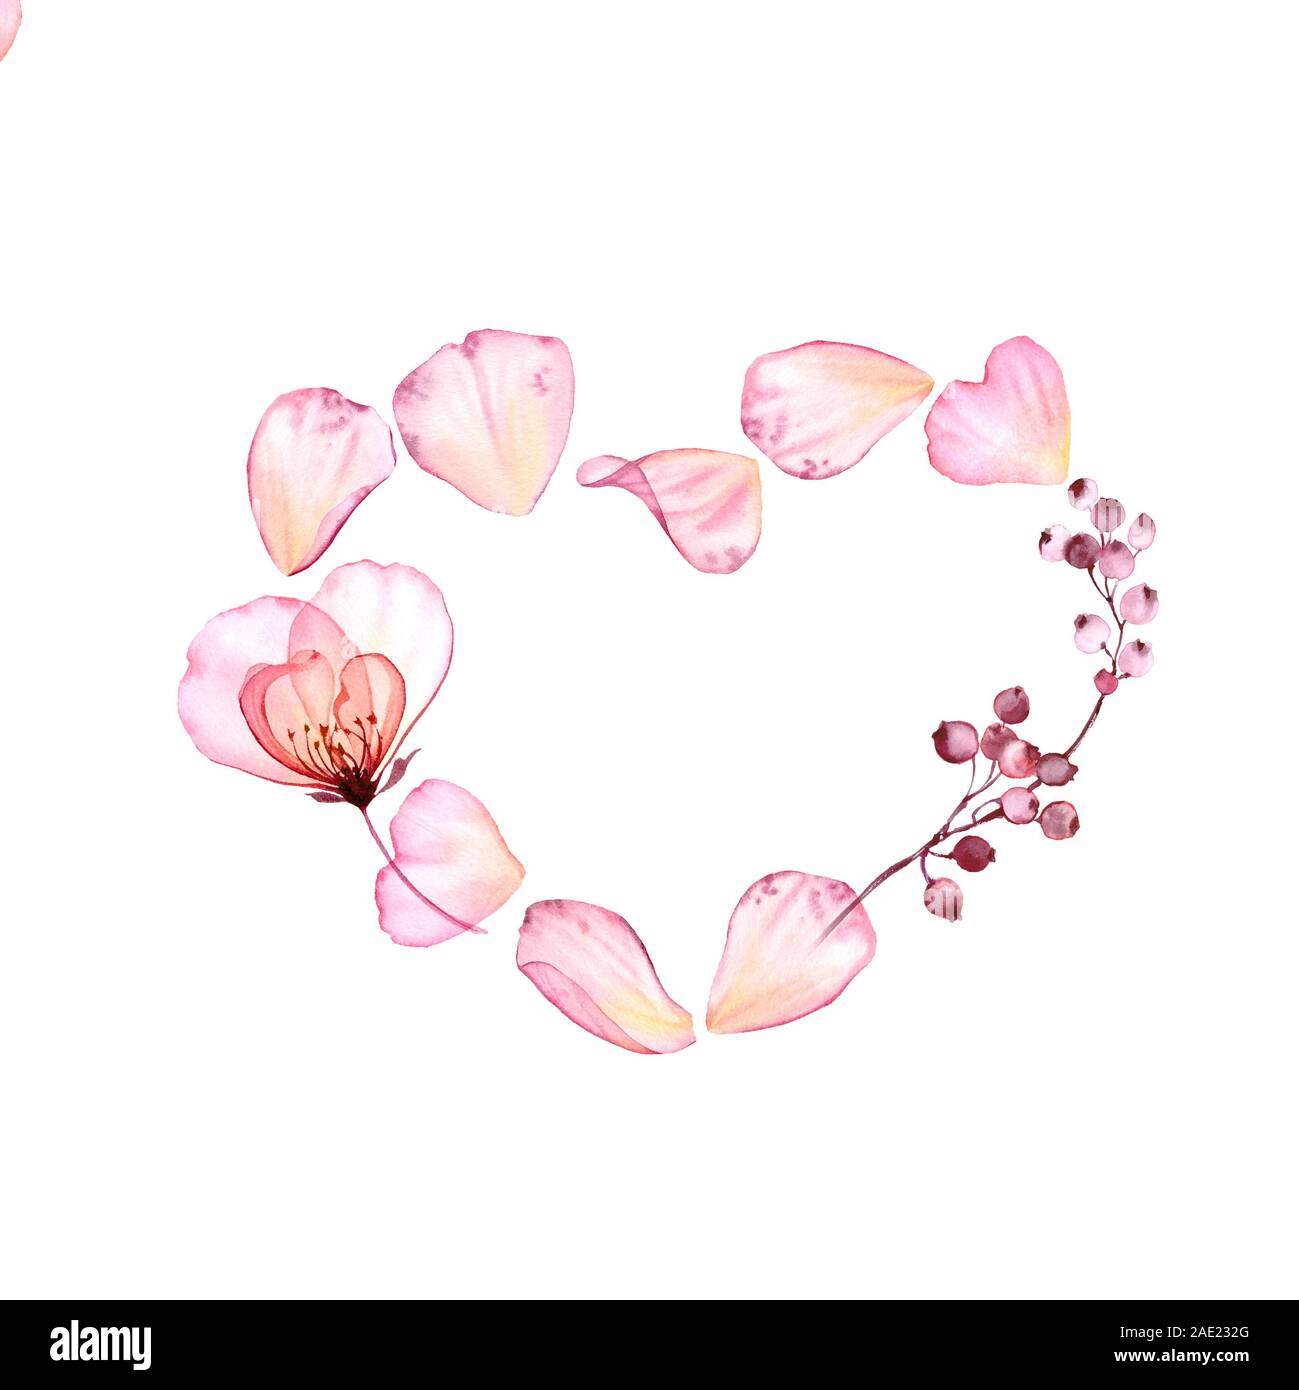 Watercolor heart og rose petals. Transparent flower with flying petals and berries isolated on white. Botanical floral illustration for Saint Stock Photo